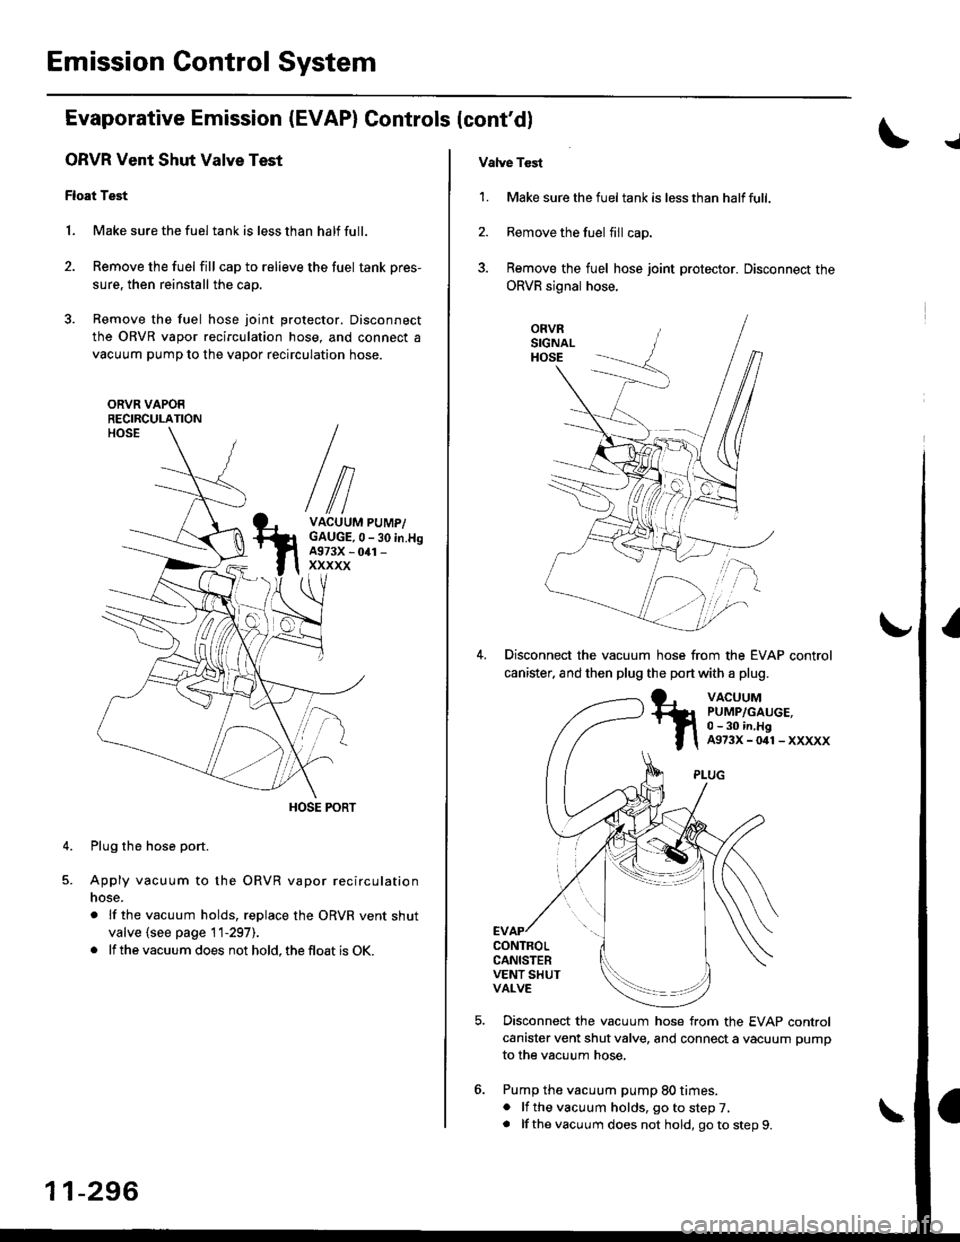 HONDA CIVIC 1996 6.G Service Manual Emission Gontrol System
Evaporative Emission (EVAP) Controls (contdl
ORVR Vent Shut Valve Test
Float Test
1. Make sure the fuel tank is less than half full.
2. Remove the fuel fill cap to relieve the